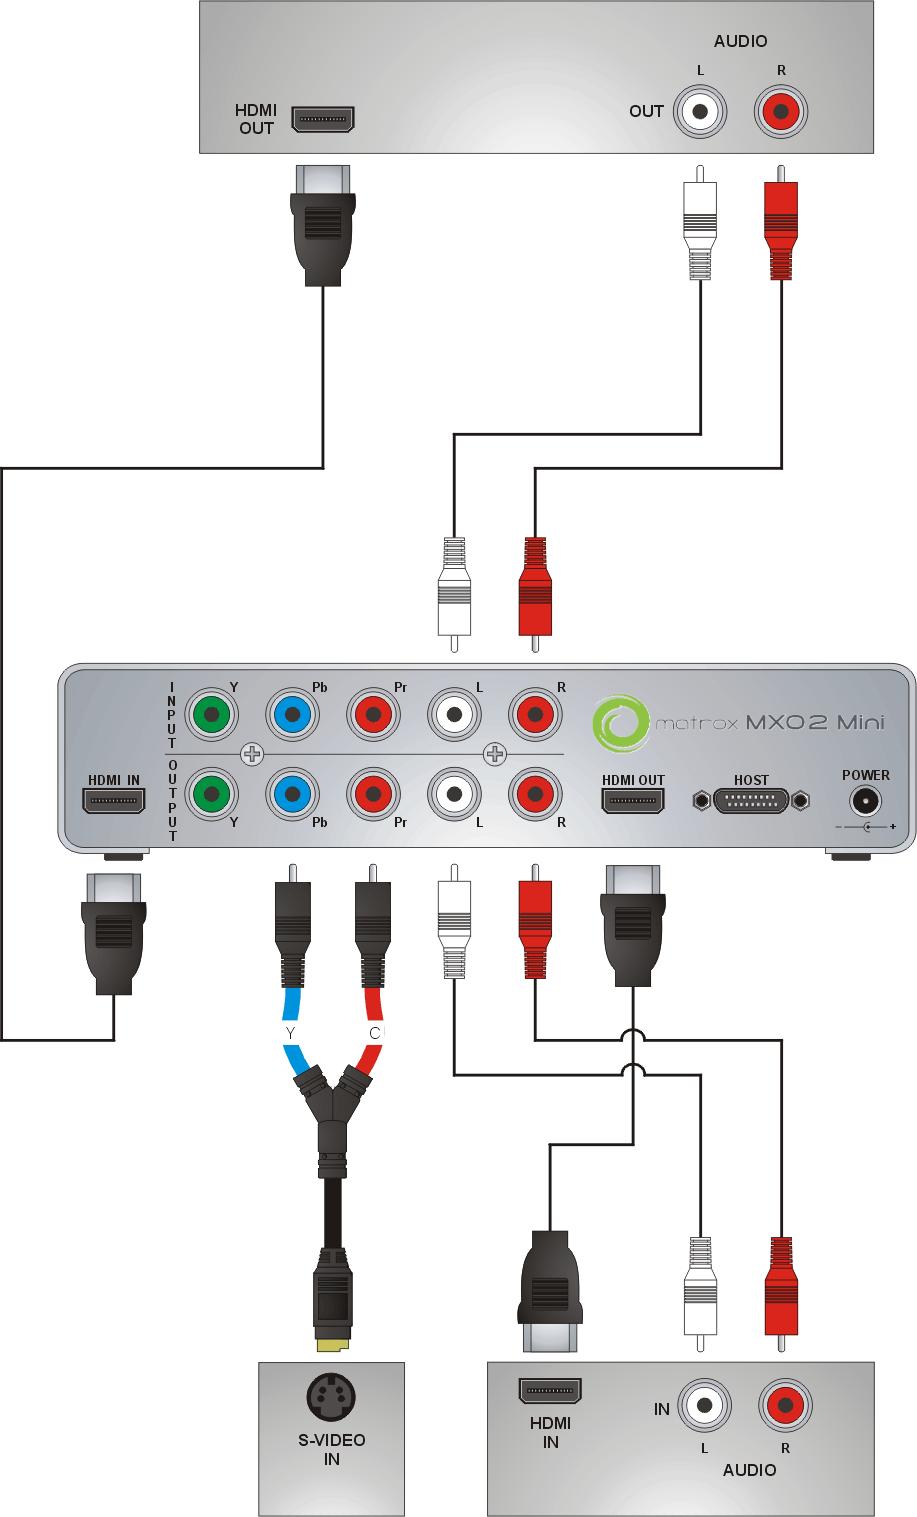 HDMI video connections In this illustration, we re using HDMI for video, RCA connectors for audio, and S-Video for video monitoring.